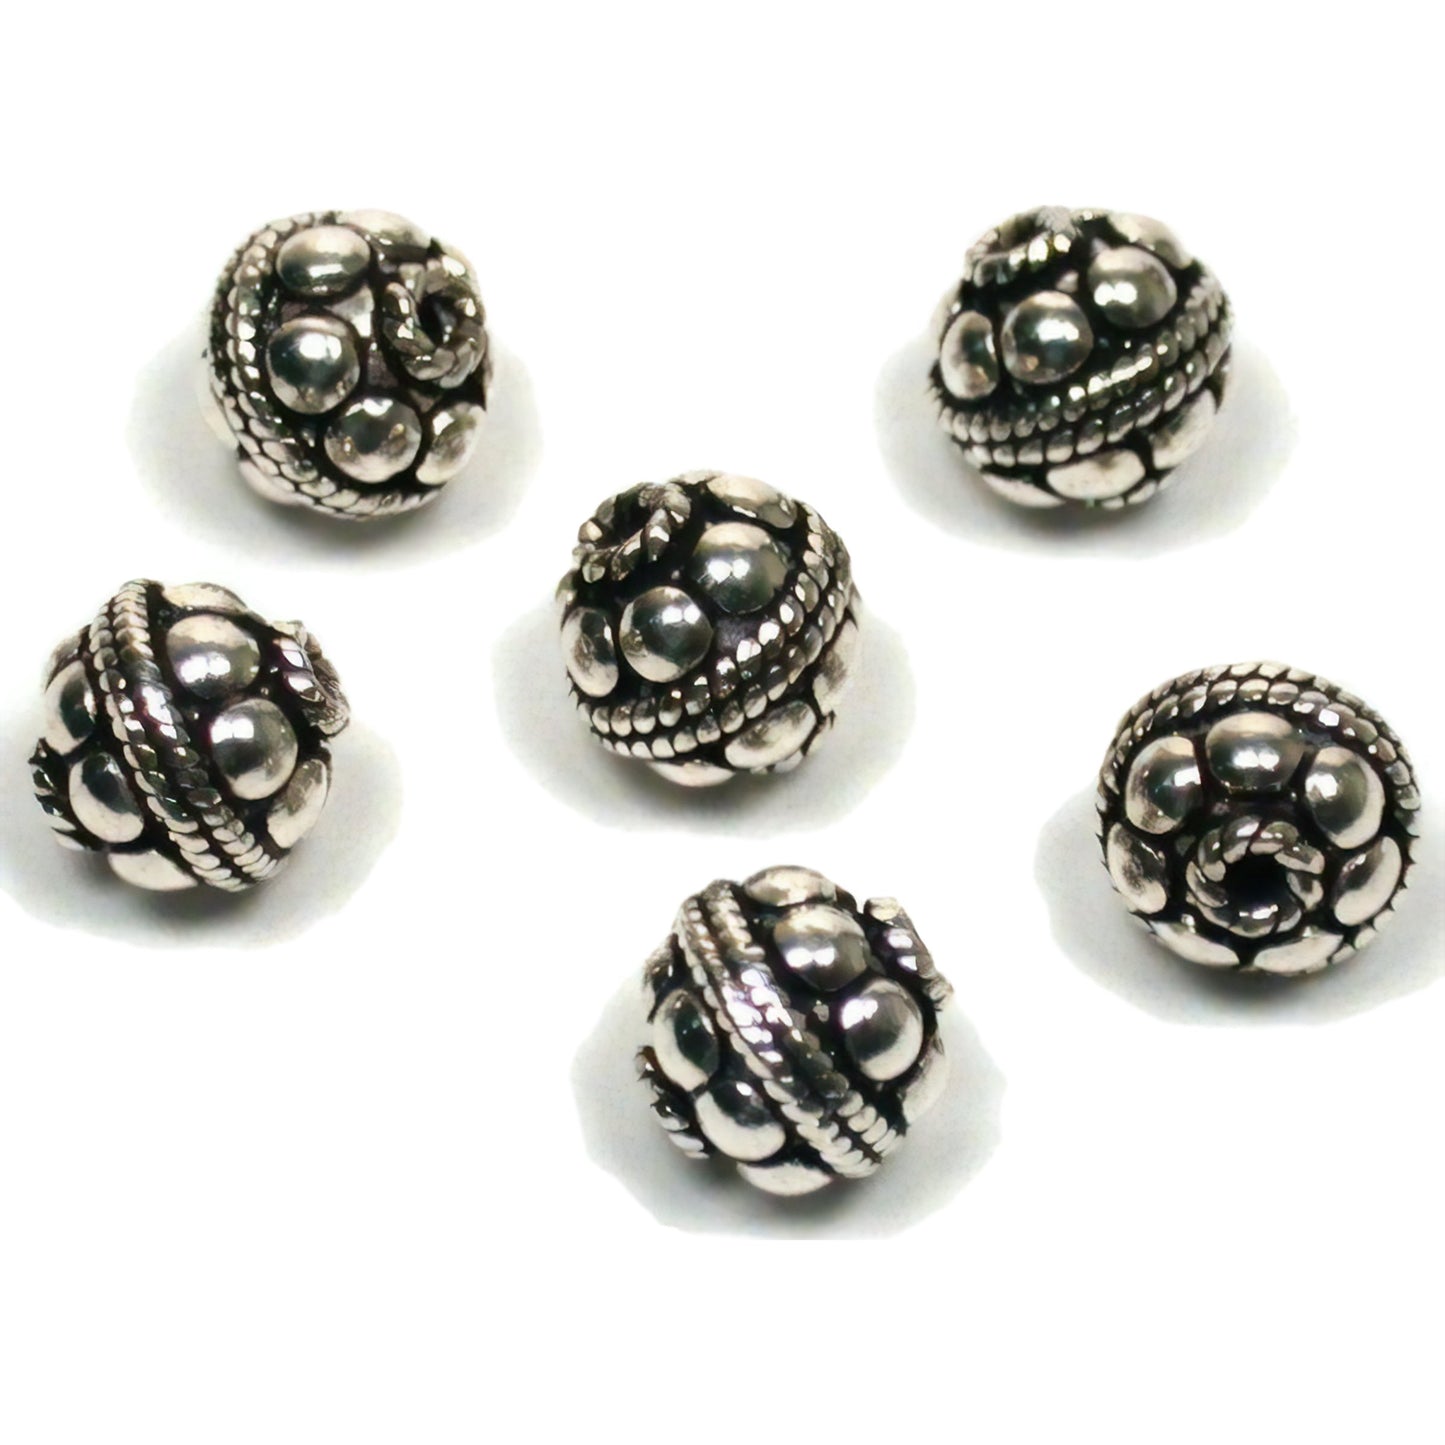 6 Sterling Silver Round Bali Beads 9 x 8mm